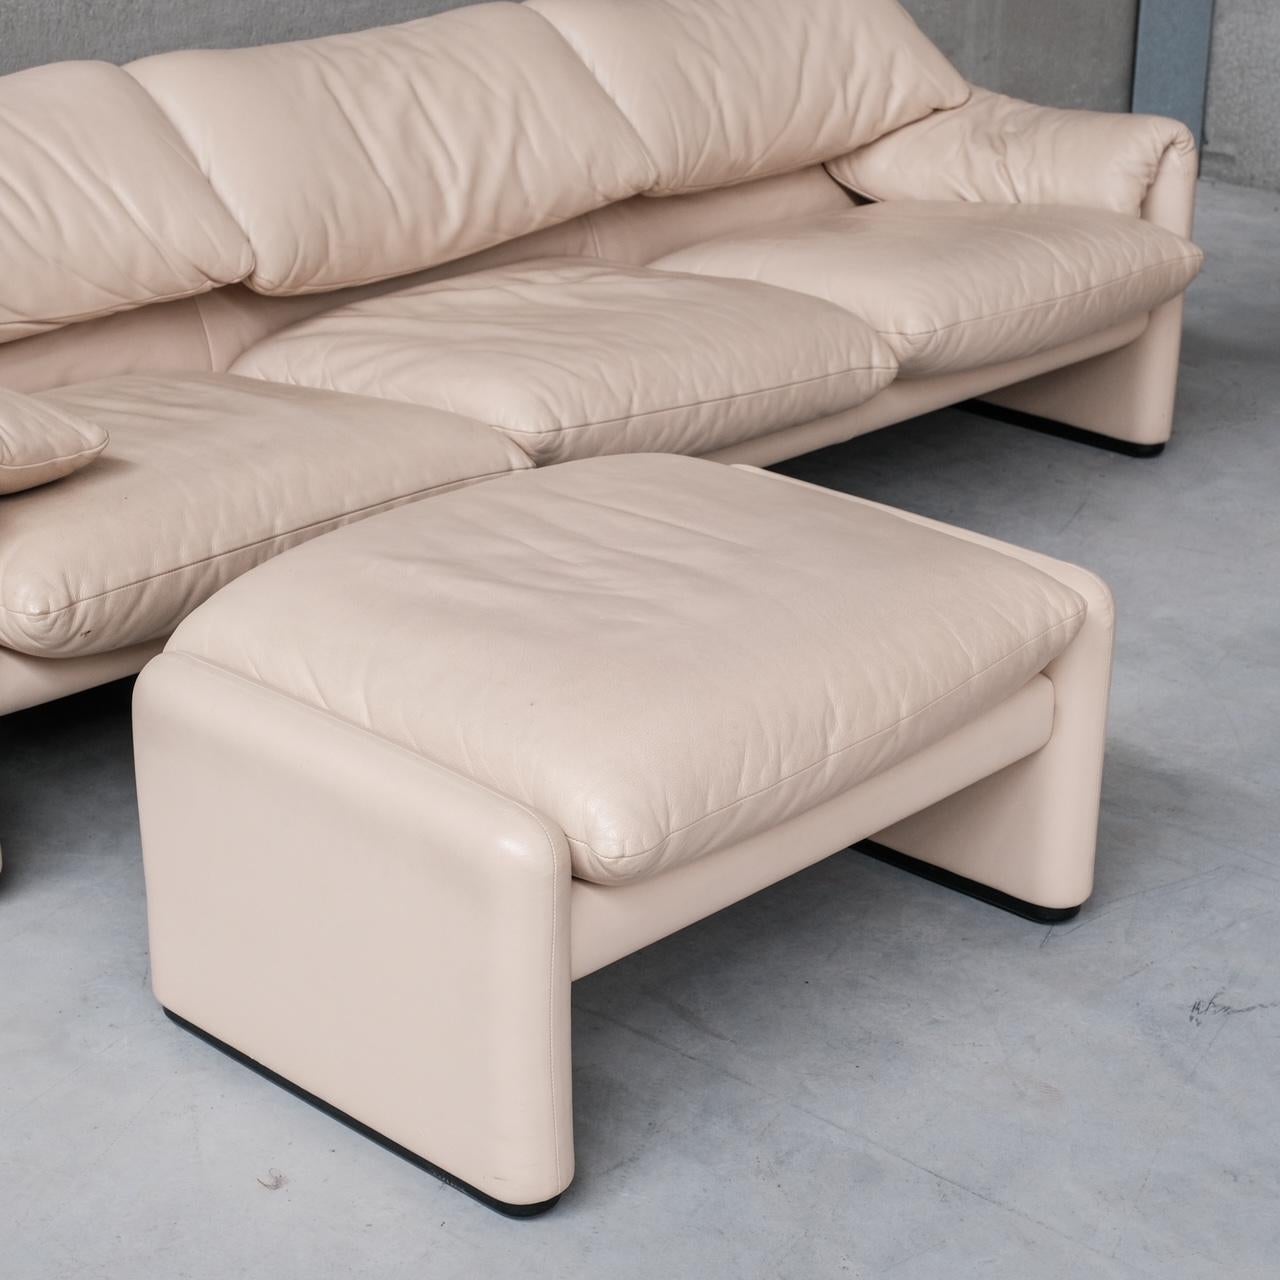 Vico Magisretti 'Maralunga' Suite of Sofas and Armchairs for Cassina For Sale 10